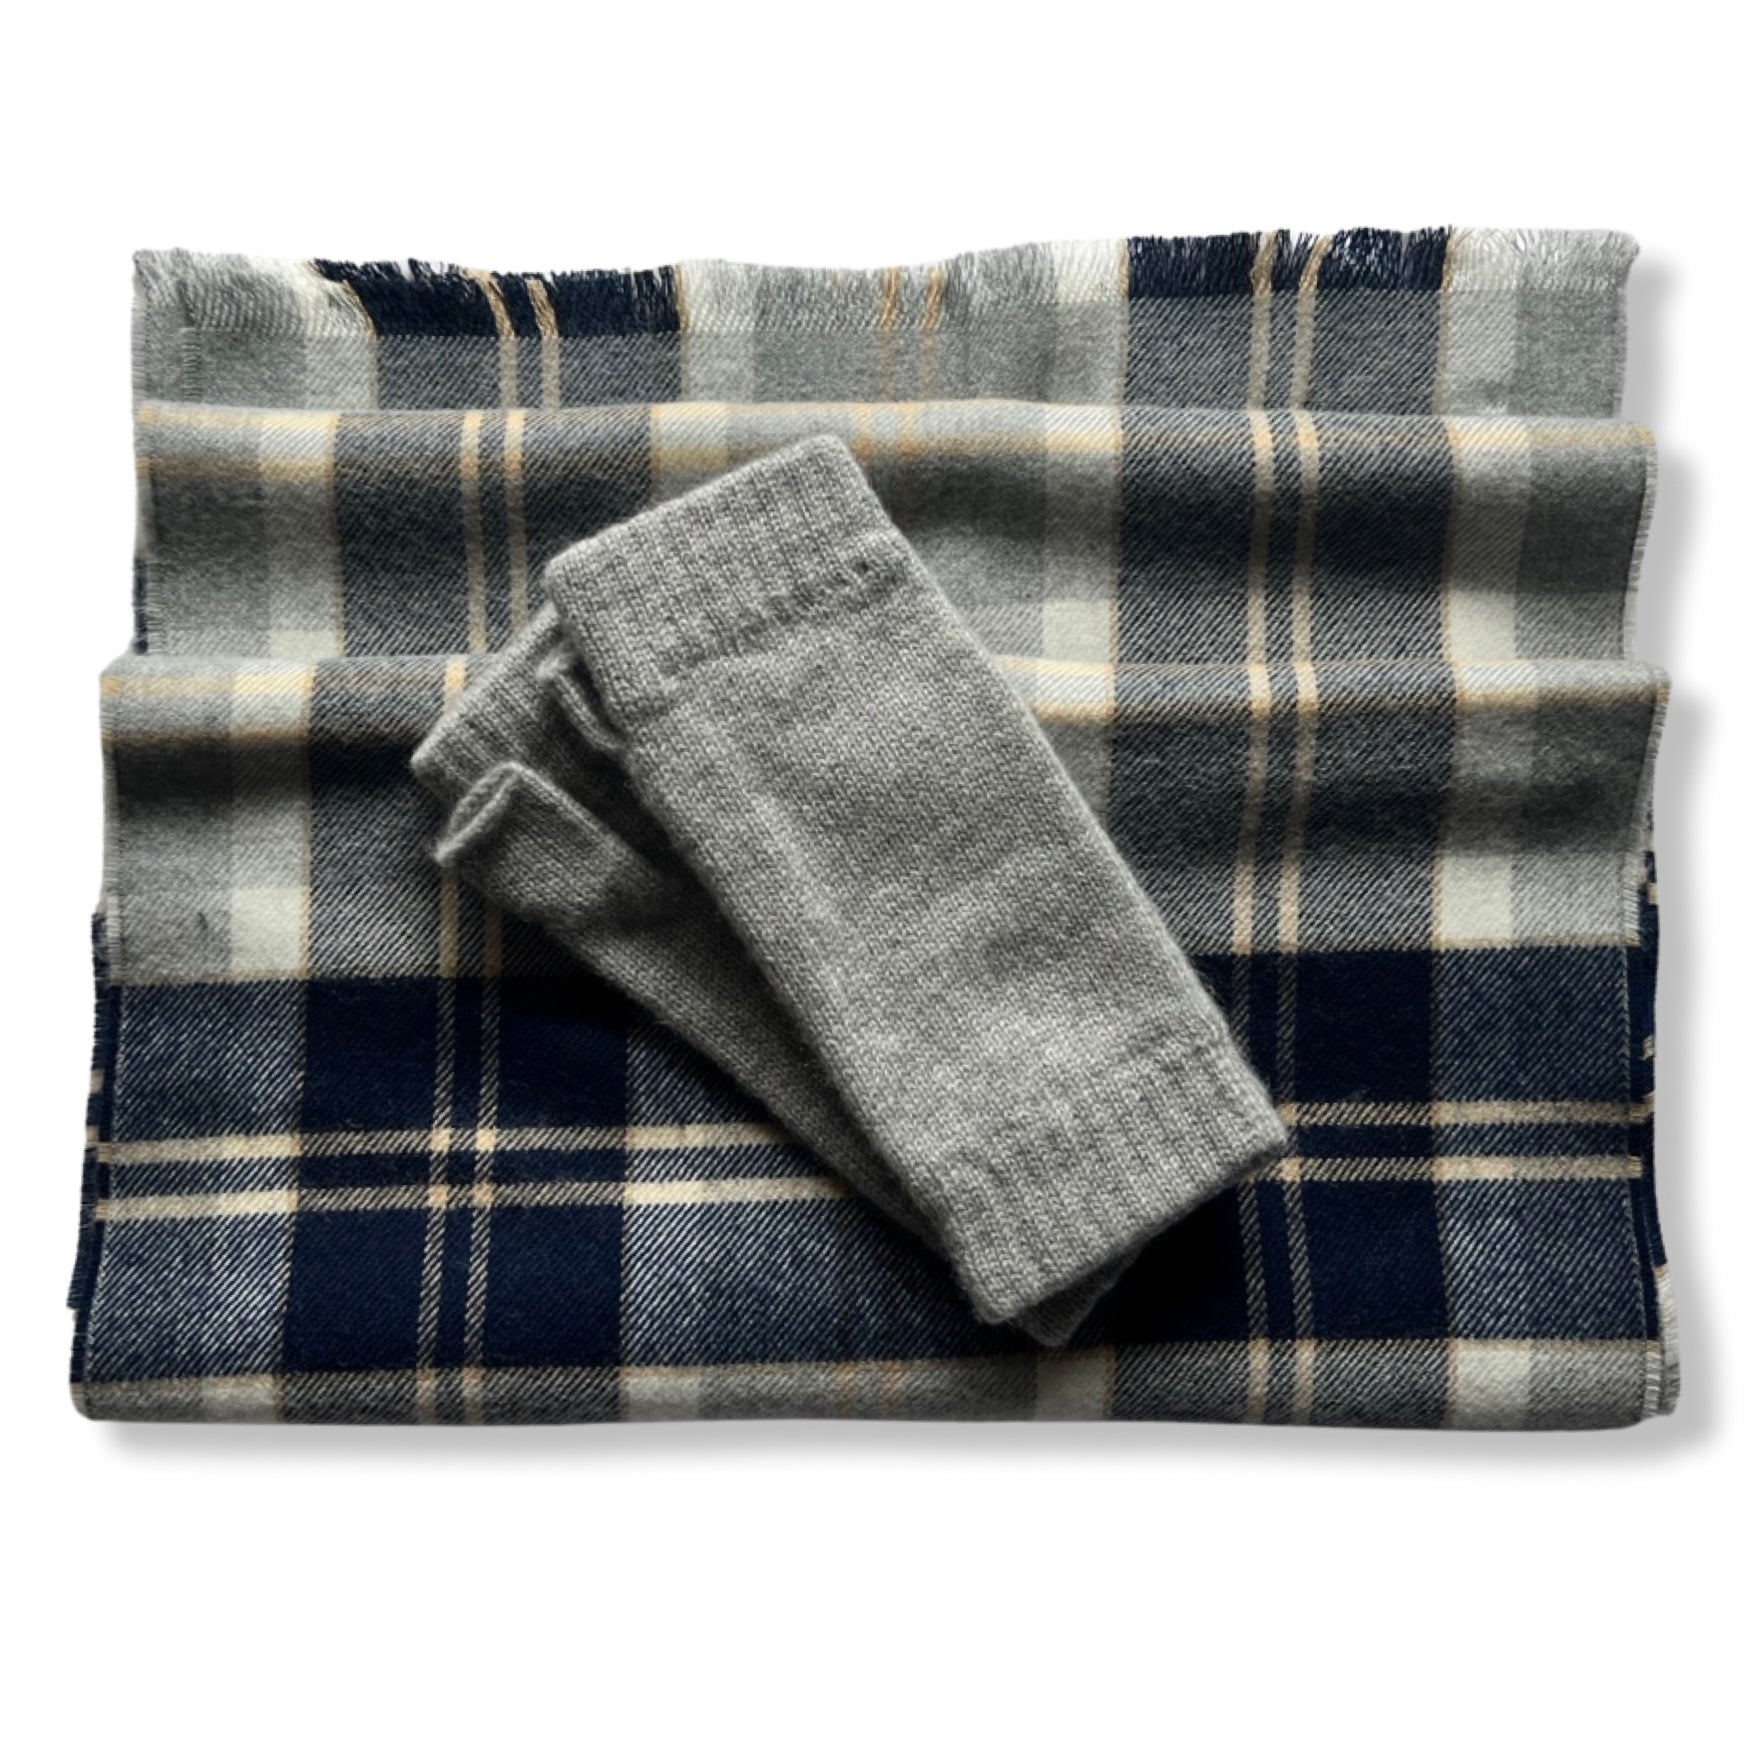 Gift Bundle - Tartan Merino Scarf with Cashmere Wrist Warmers, Scarves, Hickman & Bousfield - Hickman & Bousfield, Safari and Travel Clothing